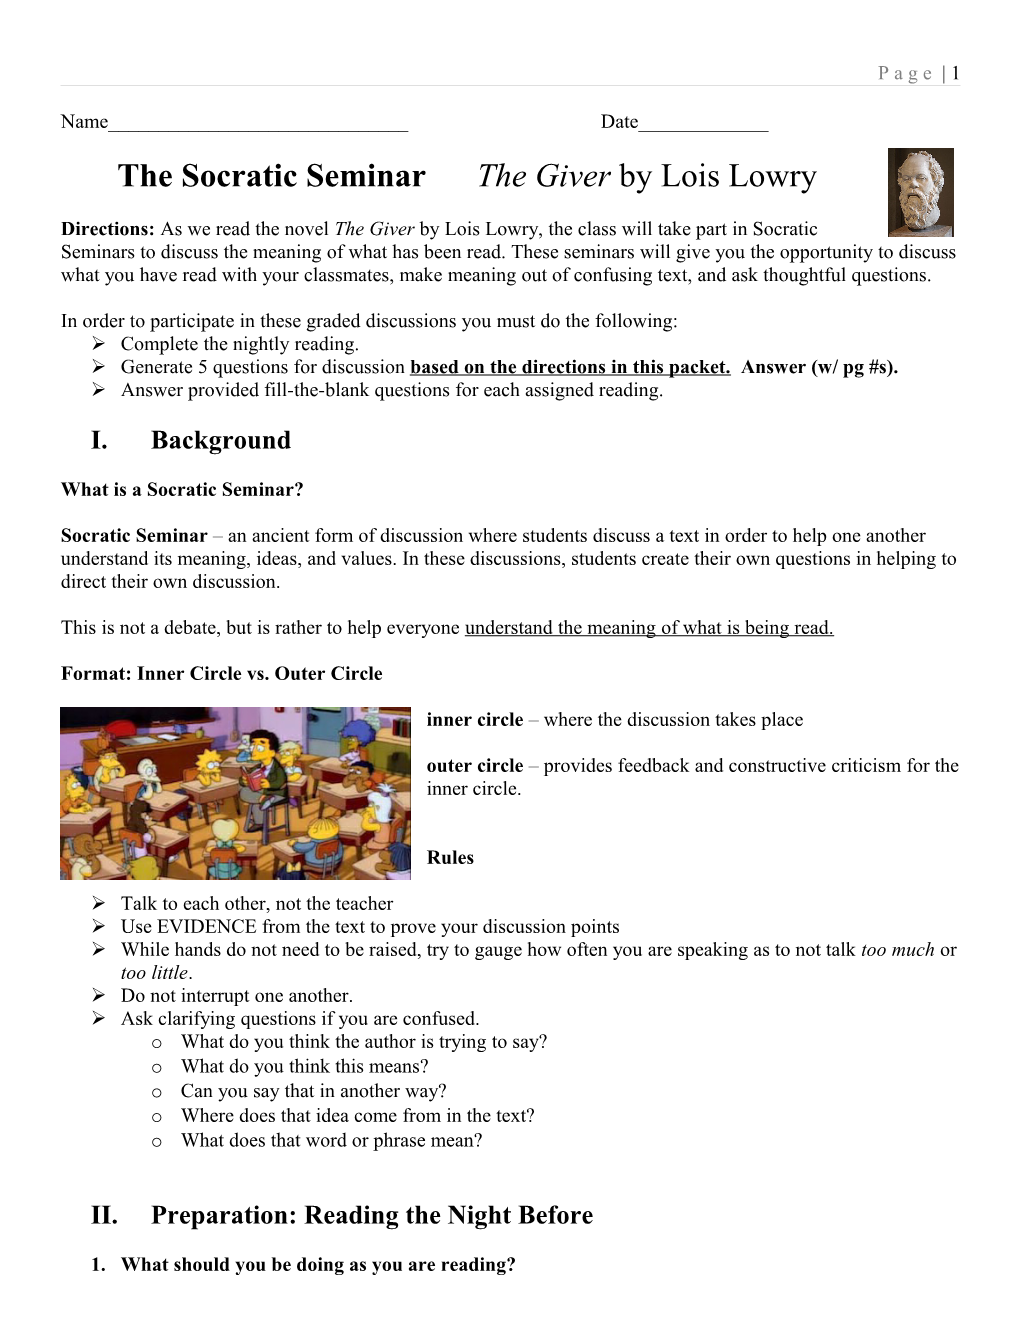 The Socratic Seminar the Giver by Lois Lowry